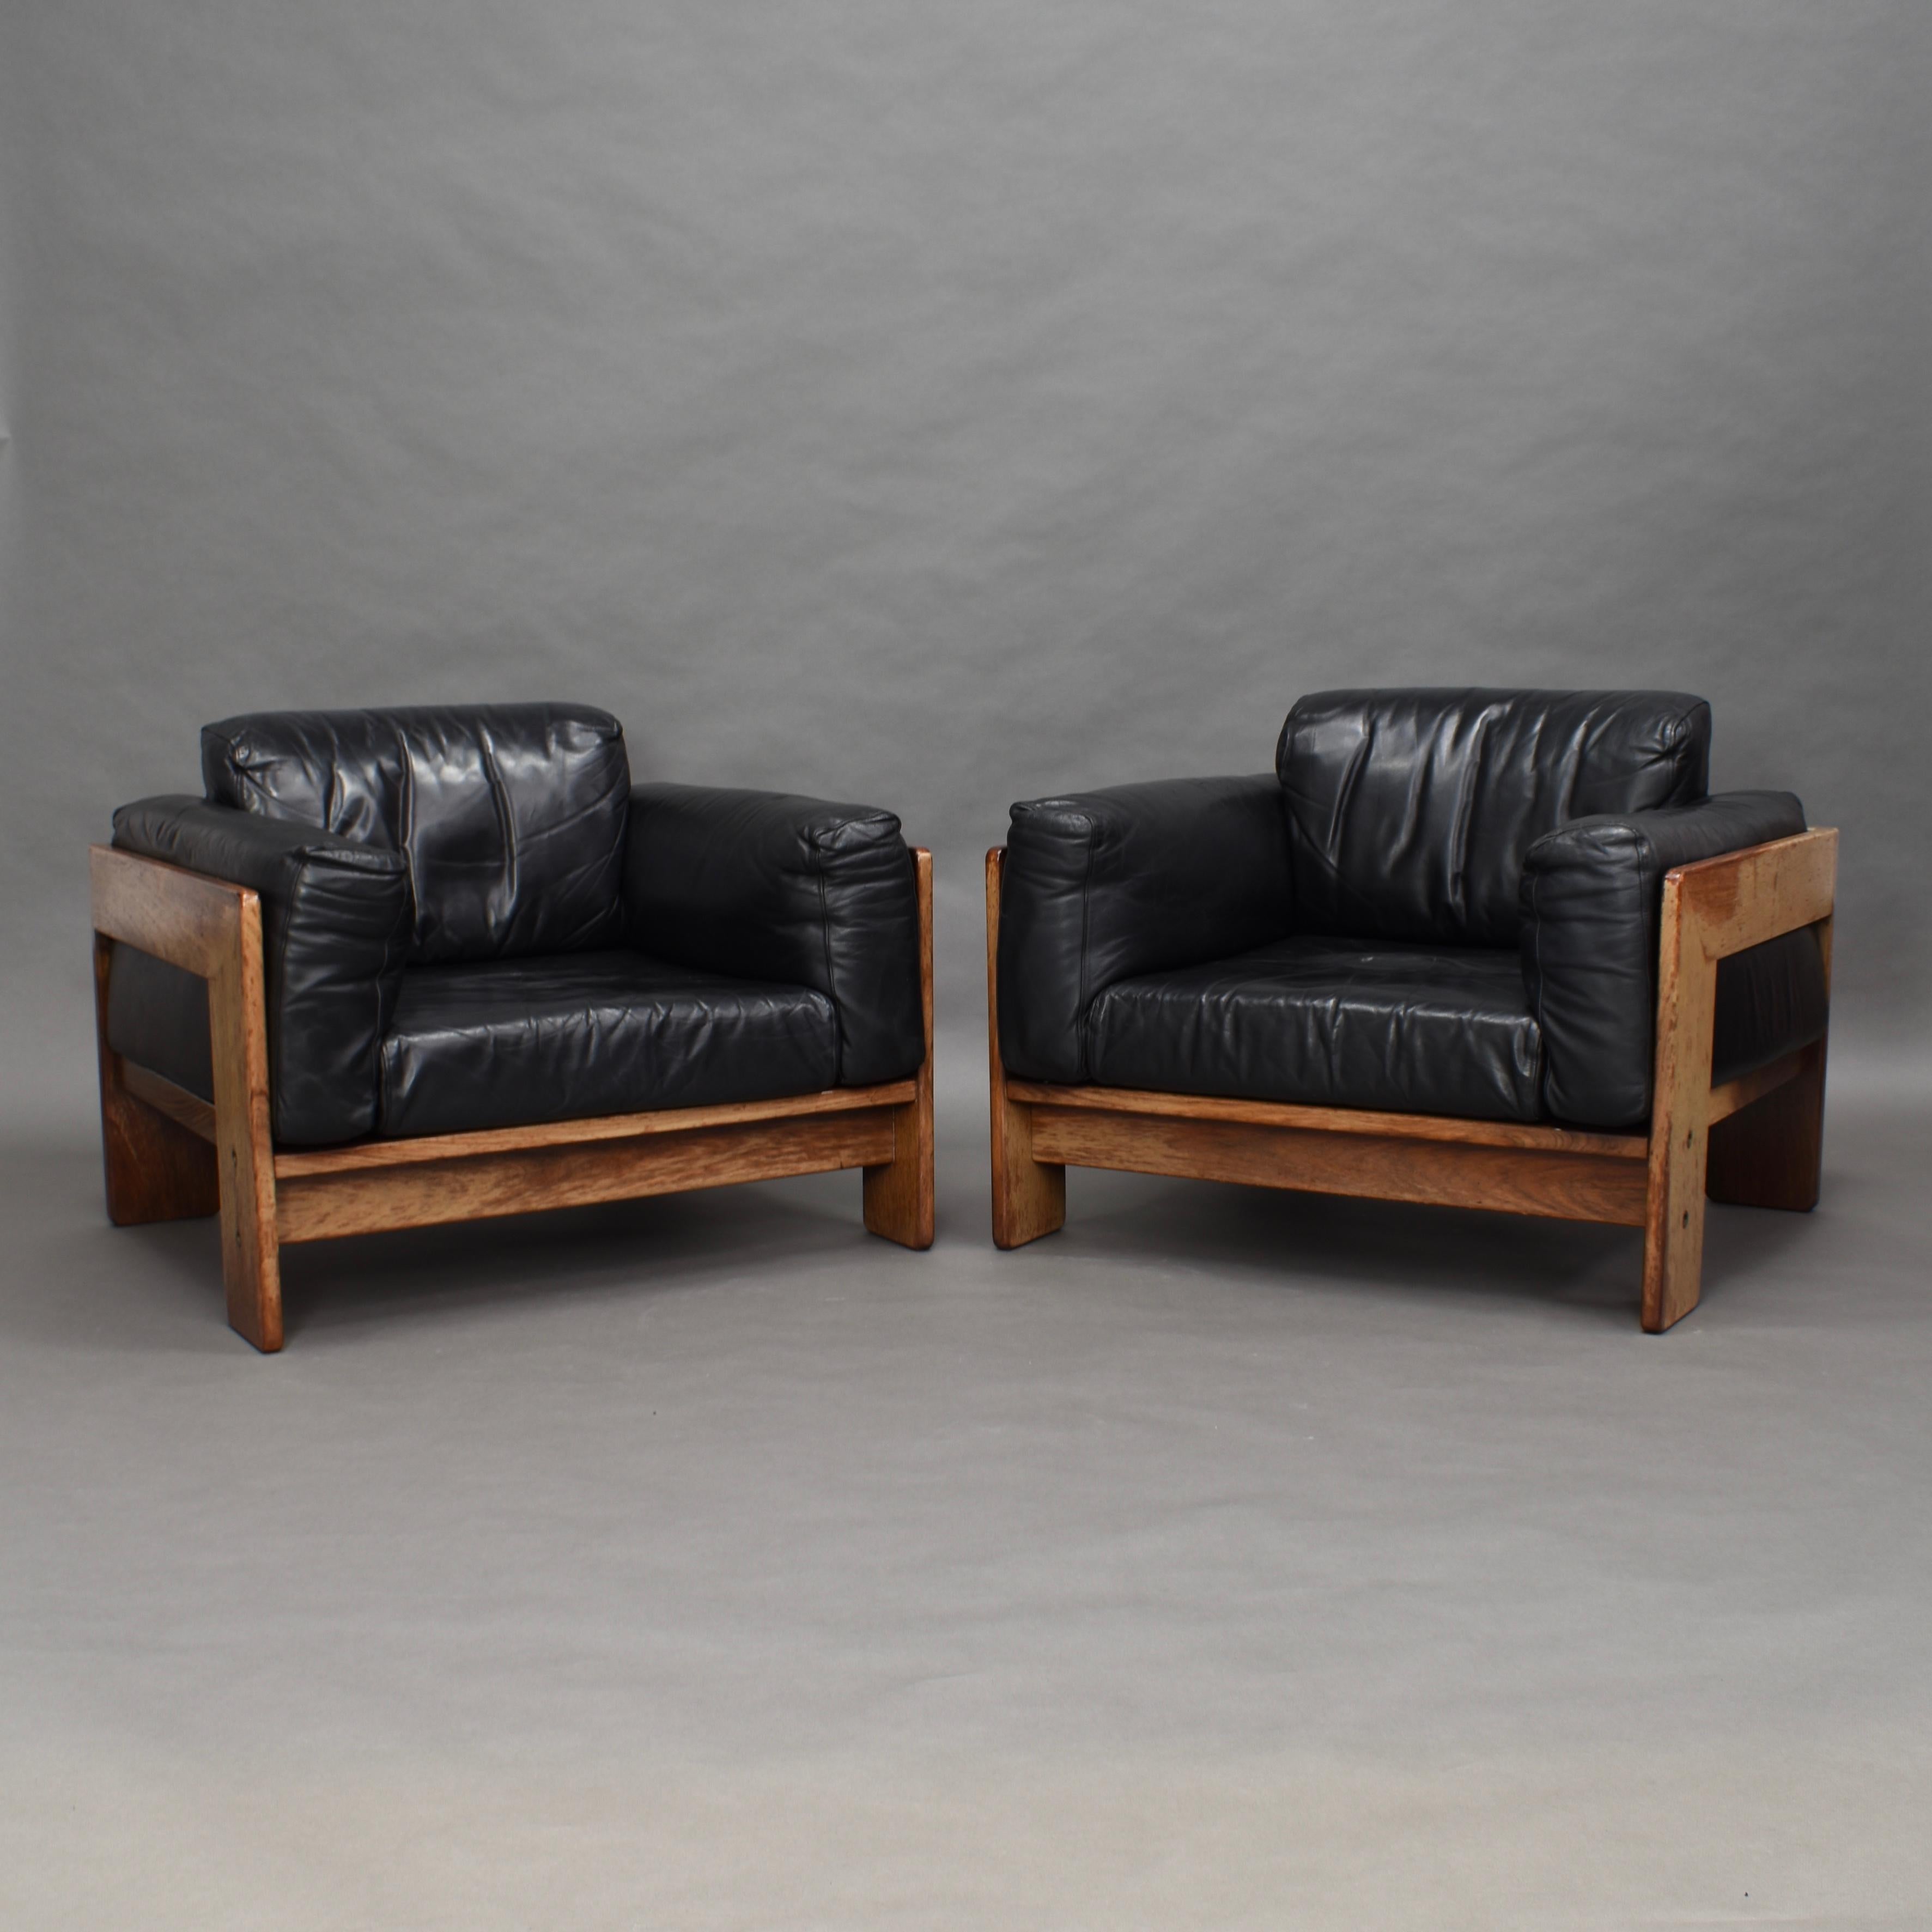 Mid-Century Modern Scarpa Pair of Bastiano Chairs in Black Leather and Rosewood, Knoll Italy, 1975